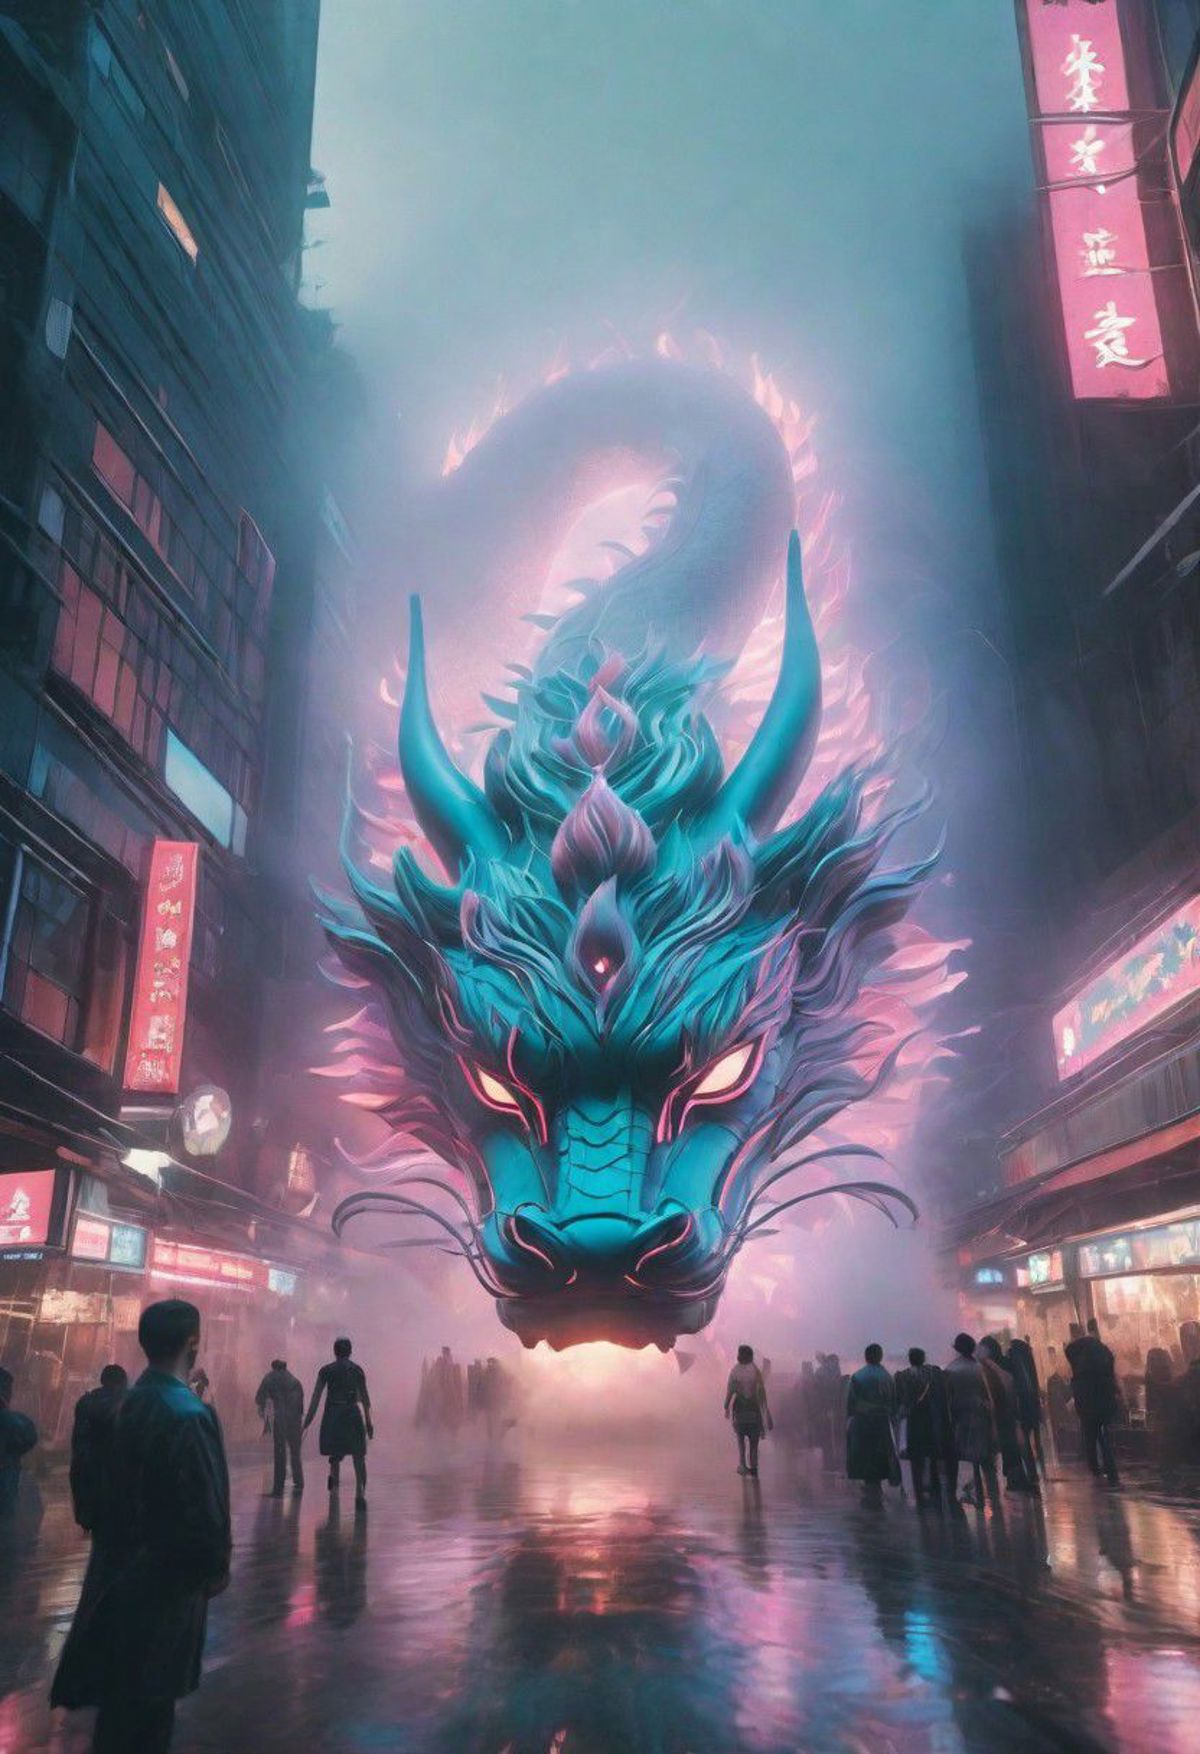 Capture the awe-inspiring sight of a colossal, mystical Chinese eastern dragon weaving through a labyrinth of urban buildi...